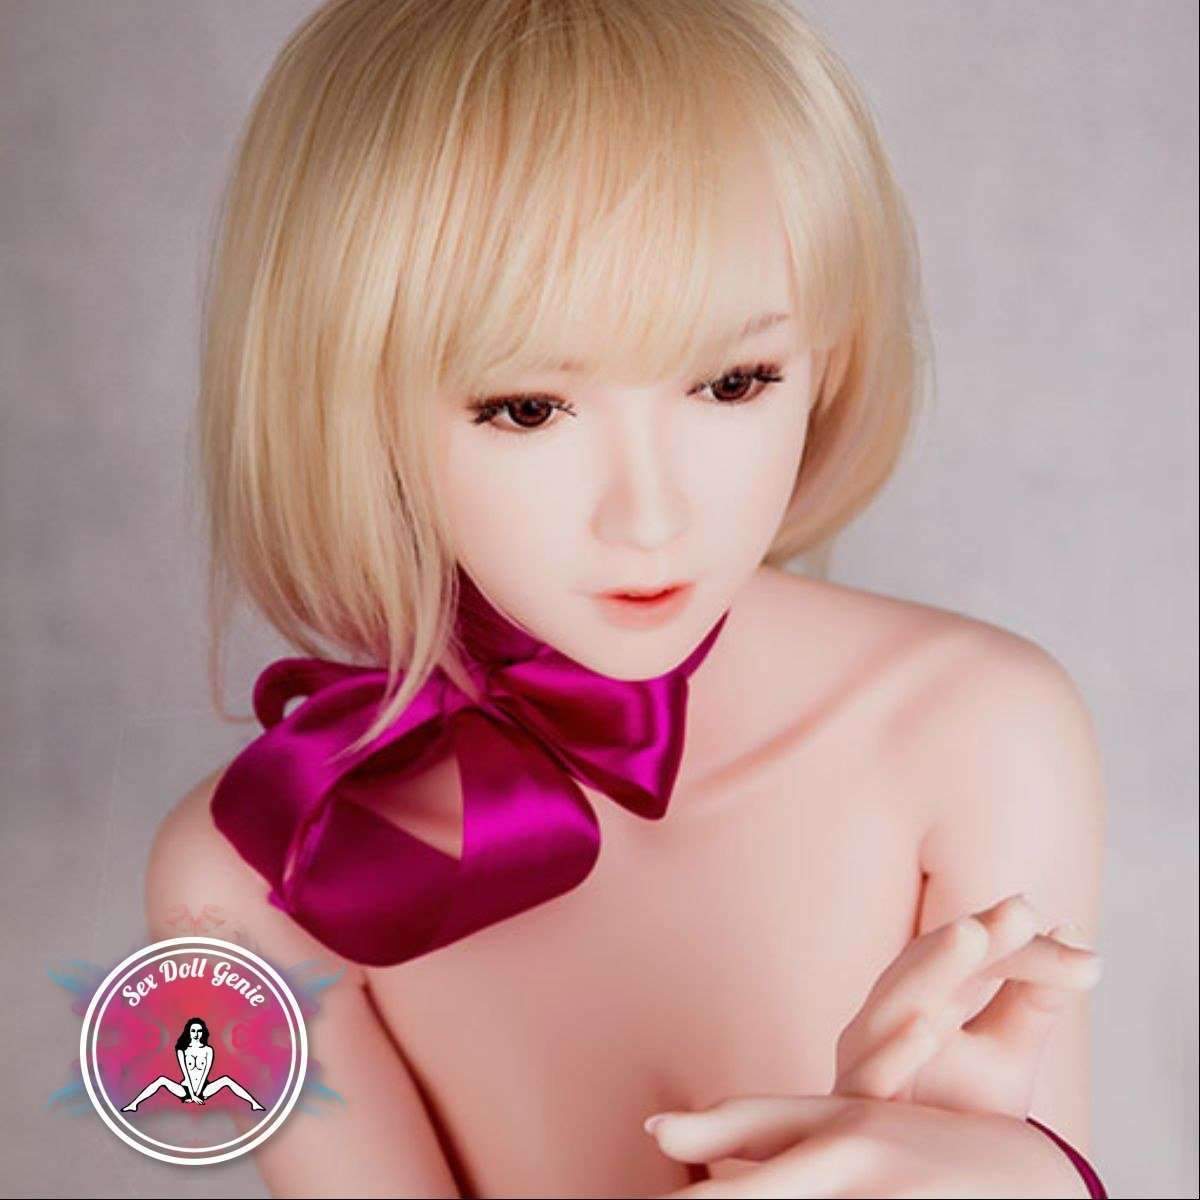 DS Doll - 163Plus - Jiayi Head - Type 1 D Cup Silicone Doll-9